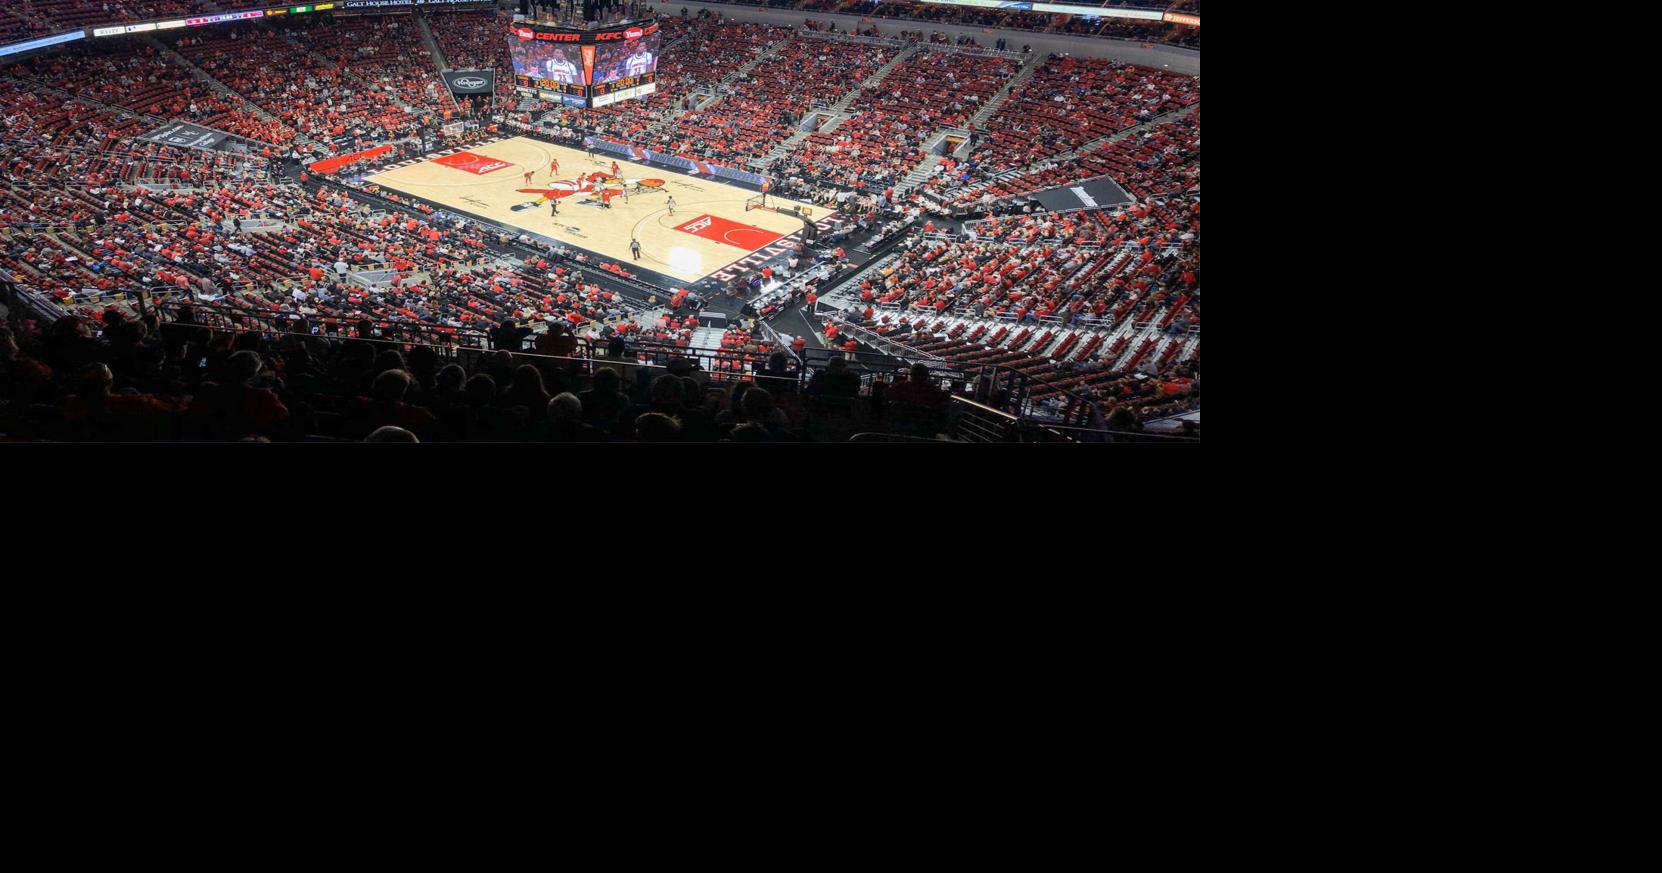 BOZICH, KFC Yum! Center eager to serve as possible NBA playoff host, Sports